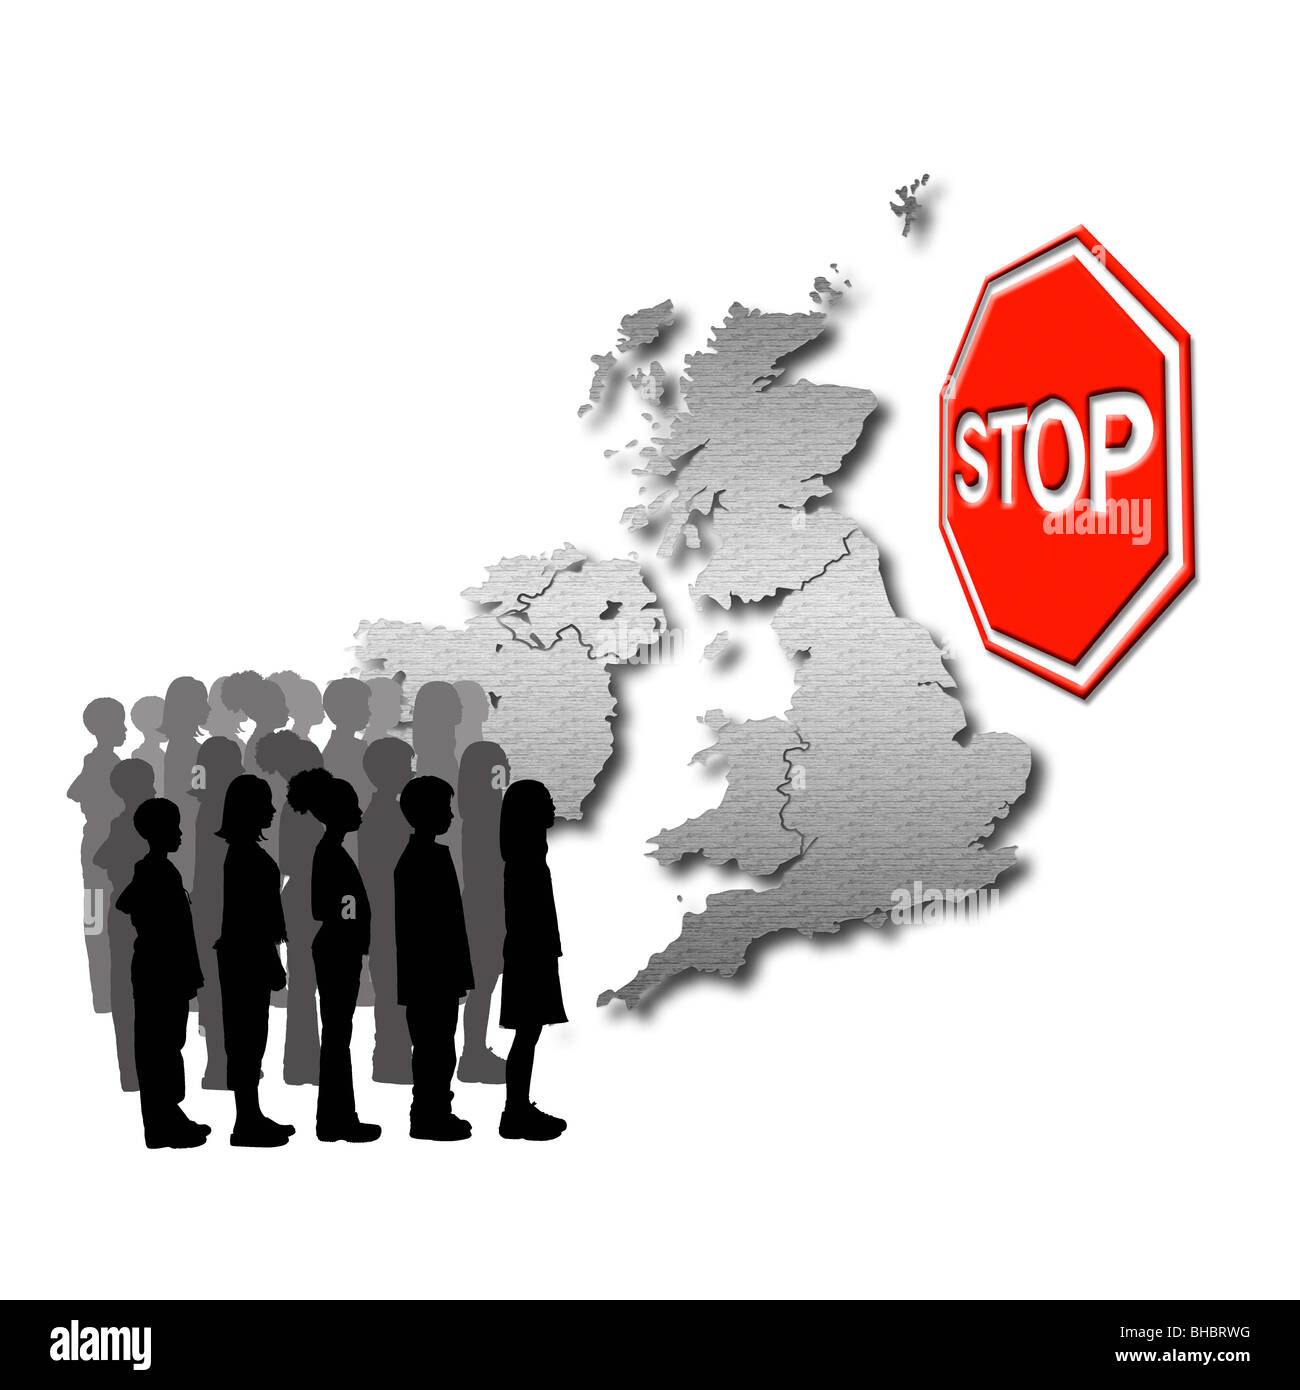 Stop Immigration! Conceptual image of people attempting to enter the UK with a large red Stop sign in front of them Stock Photo